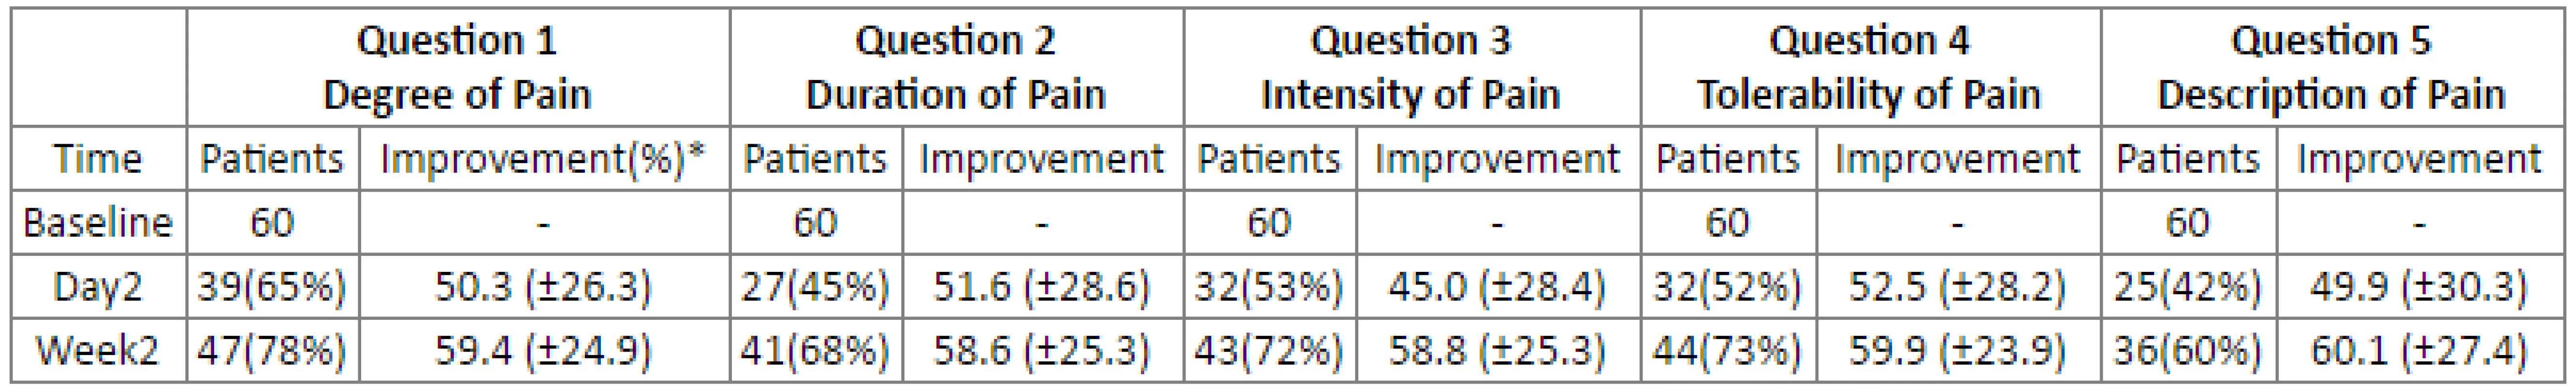 Number of patients that showed improvement (%) by at least 10% on the VAS according to question.